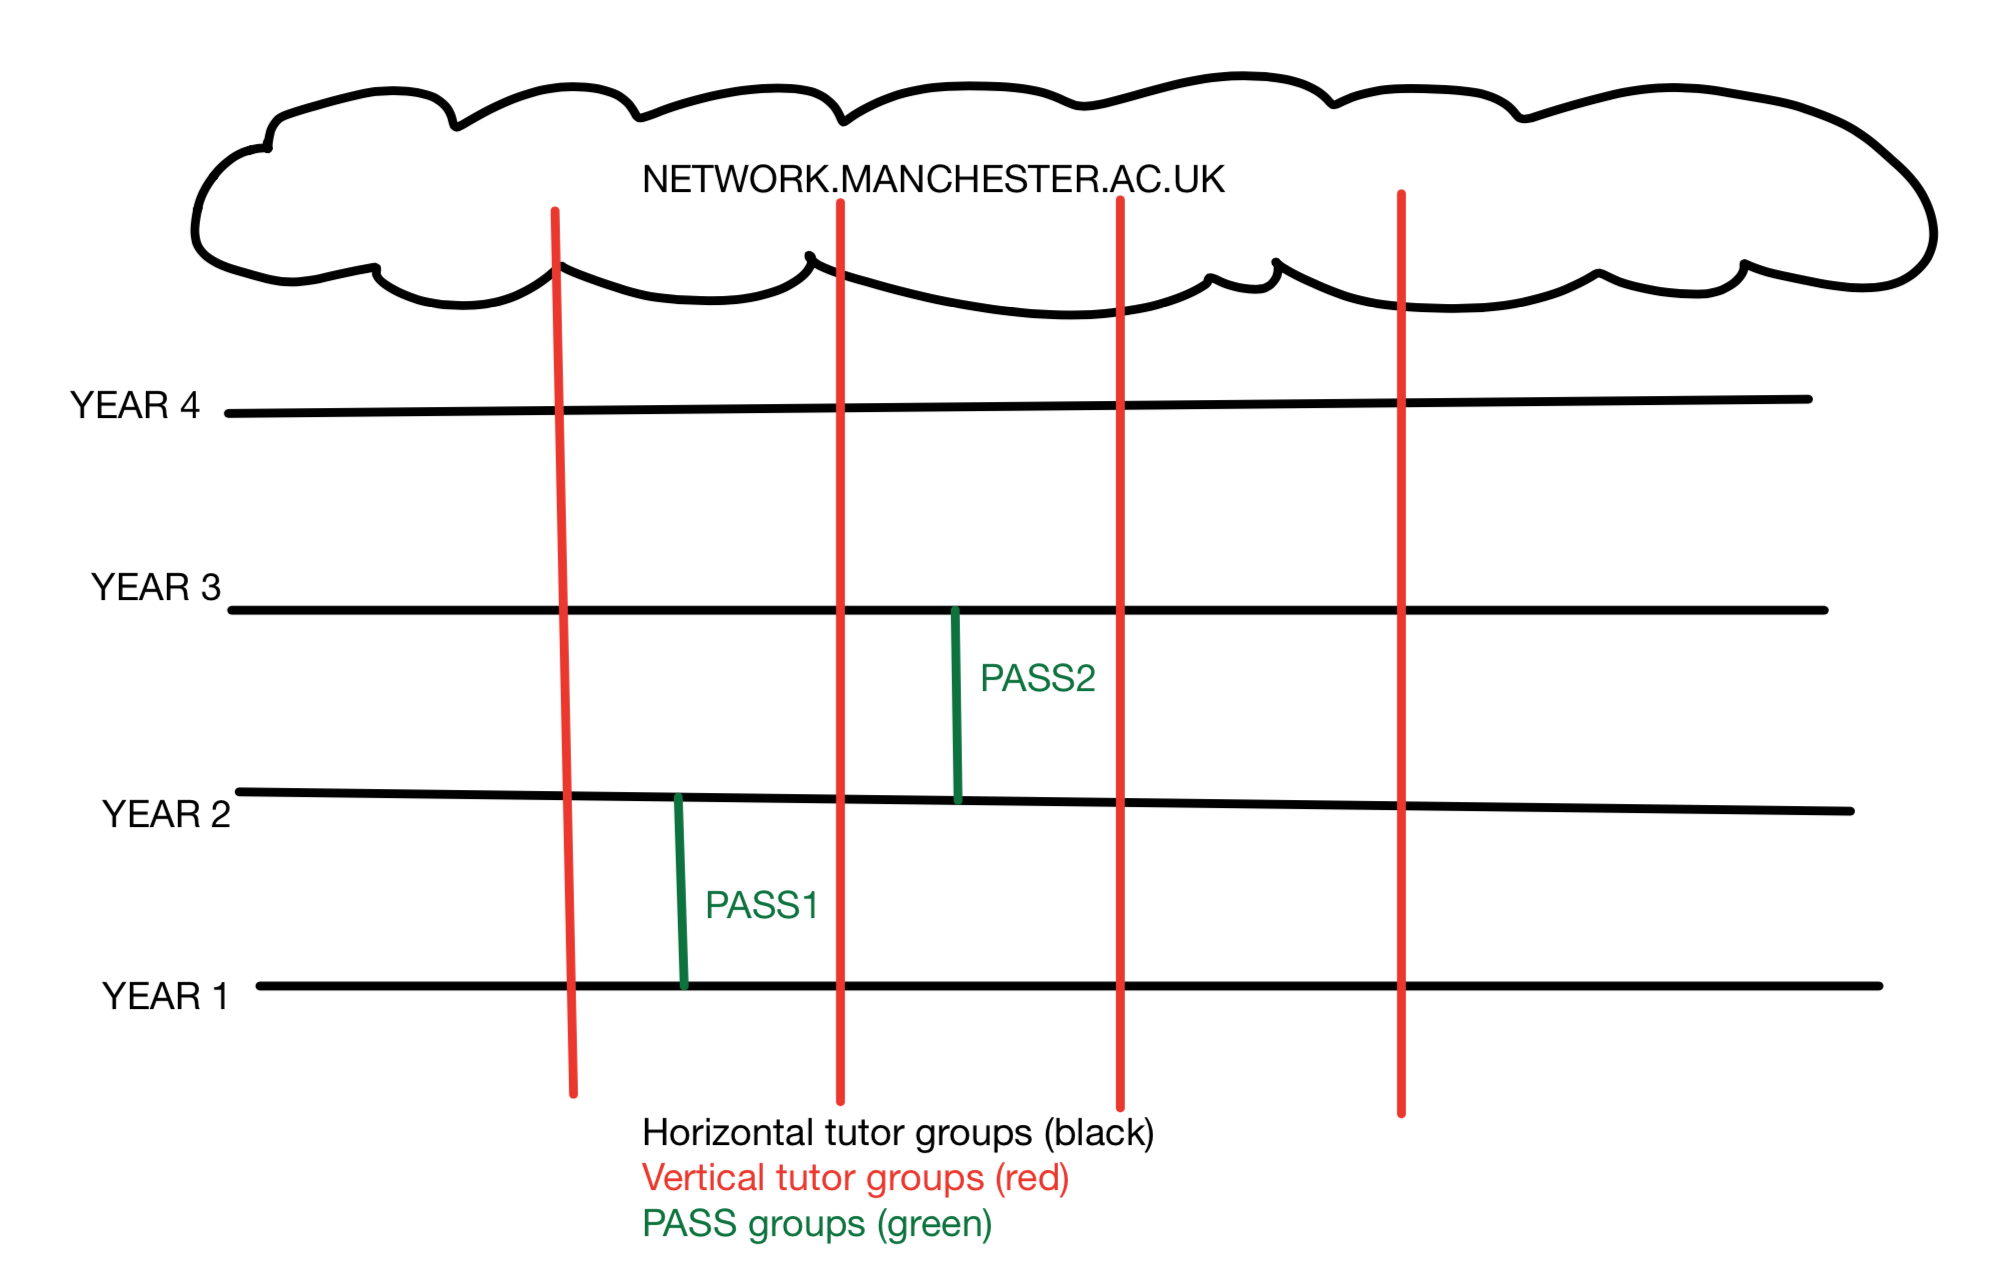 Conventional horizontal tutor groups (shown in black) bring together a group of students in the same year. For example, year 1 students meet as a small group once per week during term time with their tutor. Vertical tutor groups (shown in red) are made of of one student from each year and an alumni. Vertical tutor groups extend the idea of PASS, to full stack mentoring, crossing all levels